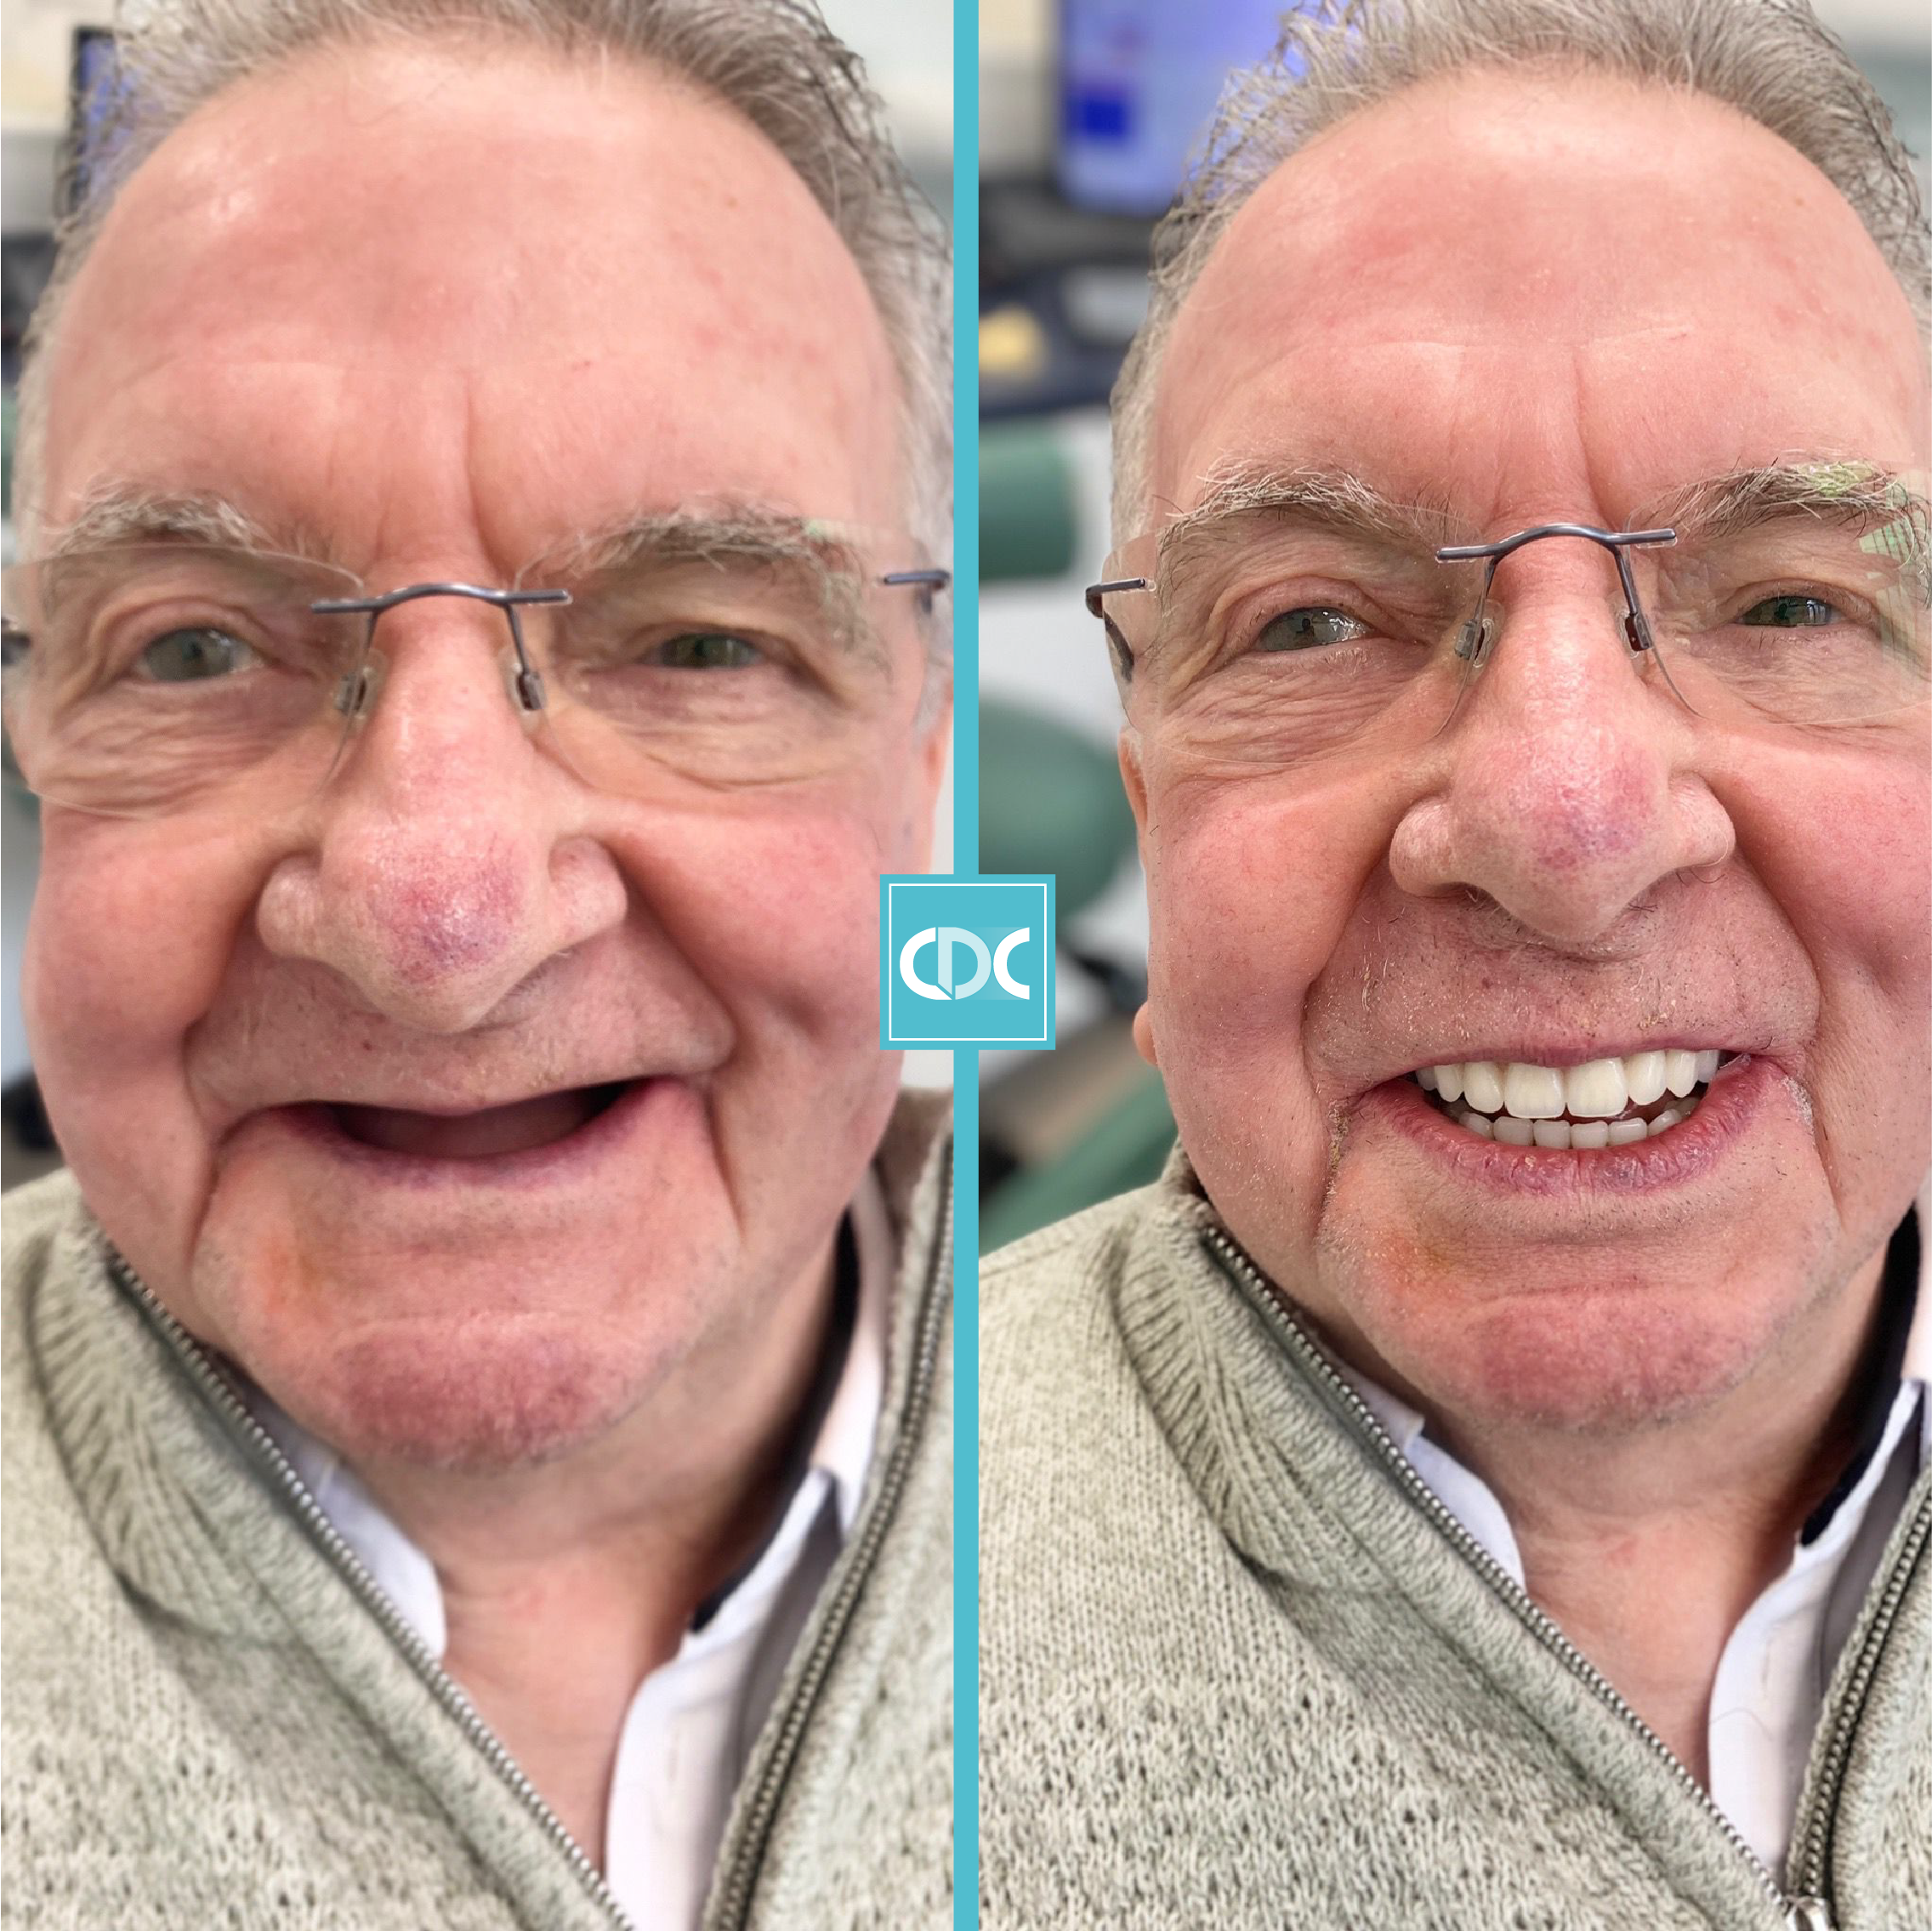 Cantley Dental Implant Implants Teeth Dentist Cosmetic Doncaster smile makeover Yorkshire Implant Open Day